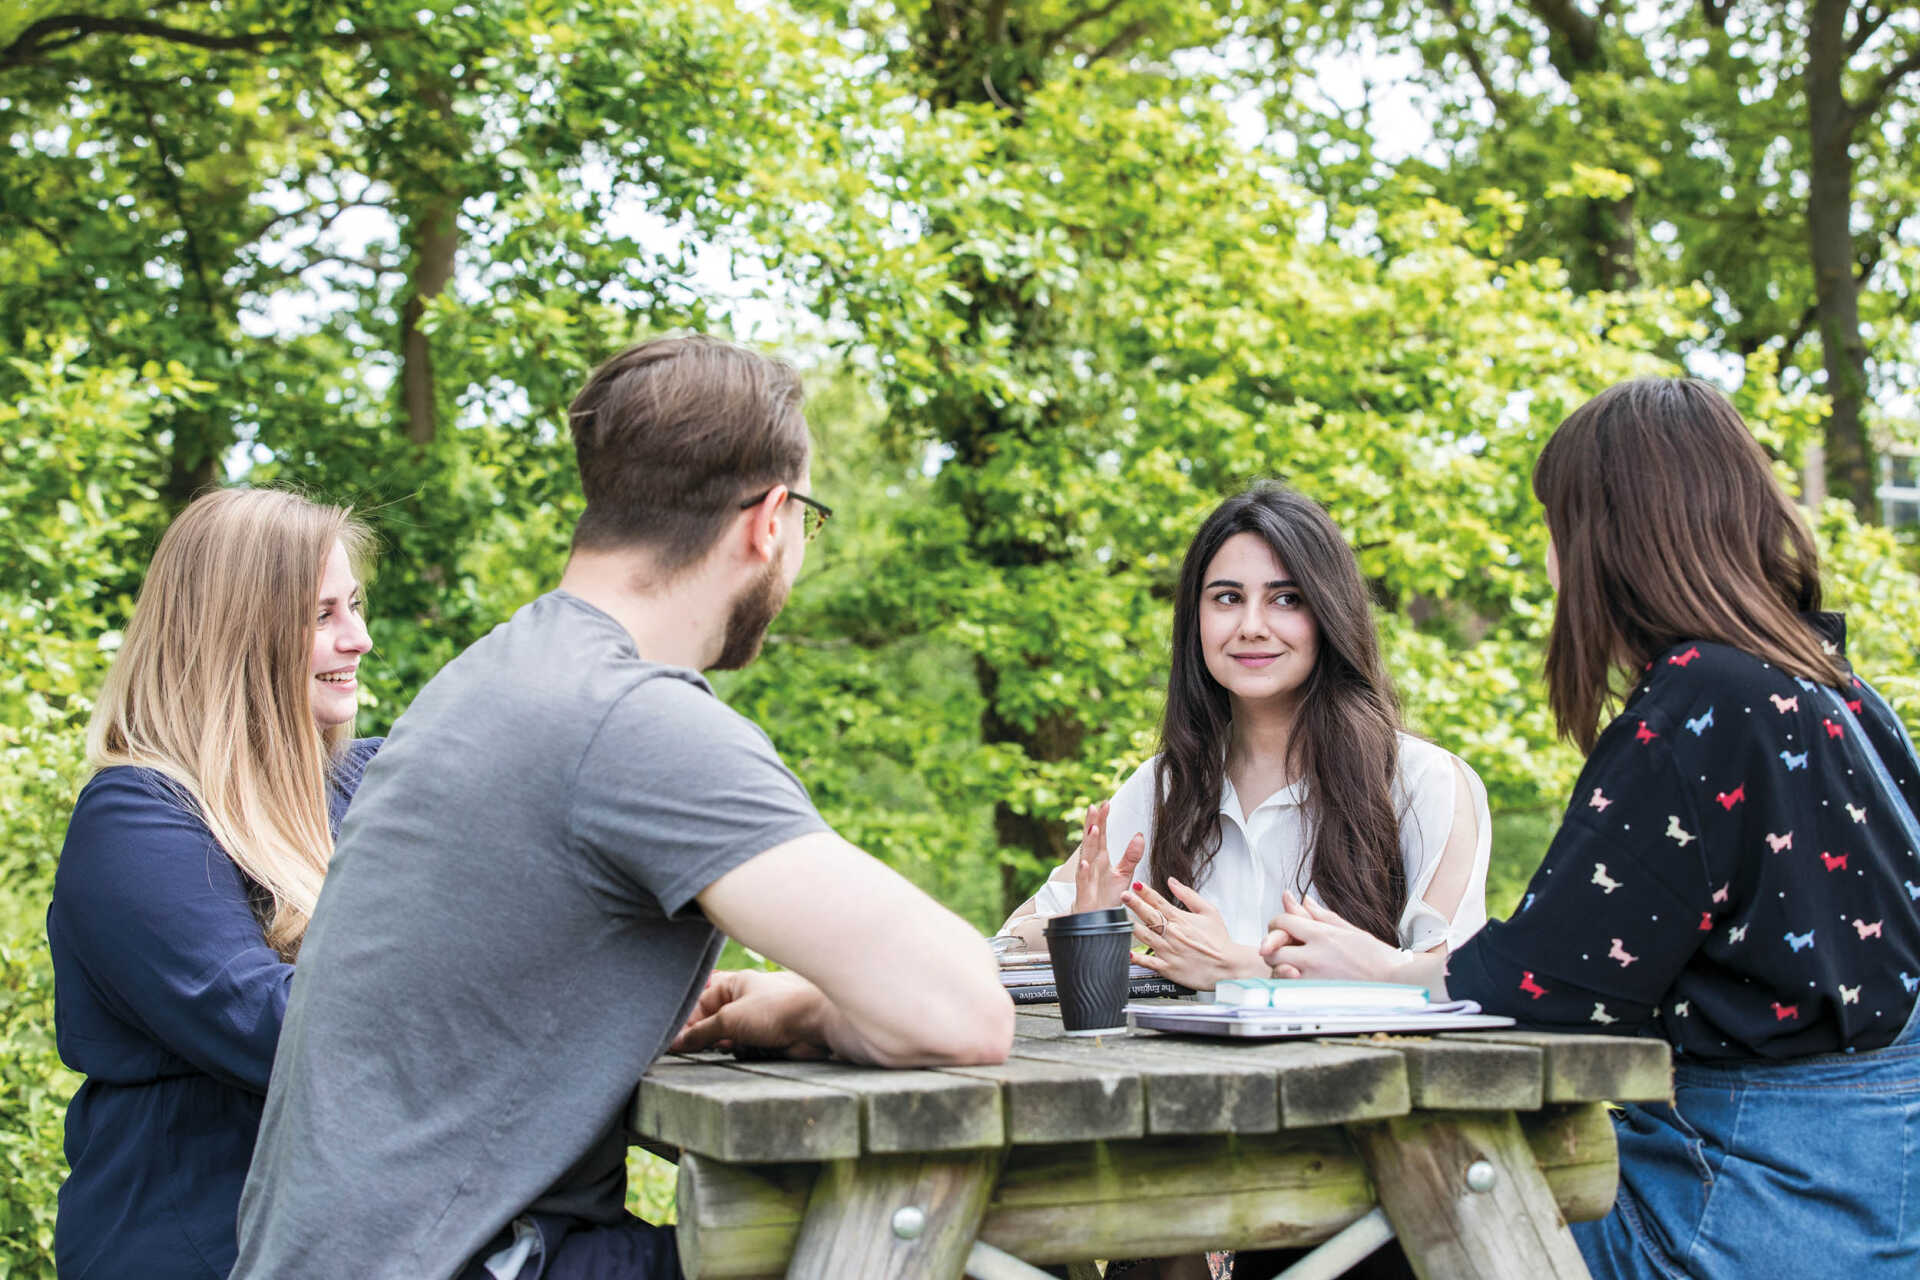 Four students sit around a table outside. The are surrounded by greenery and smile towards each other.